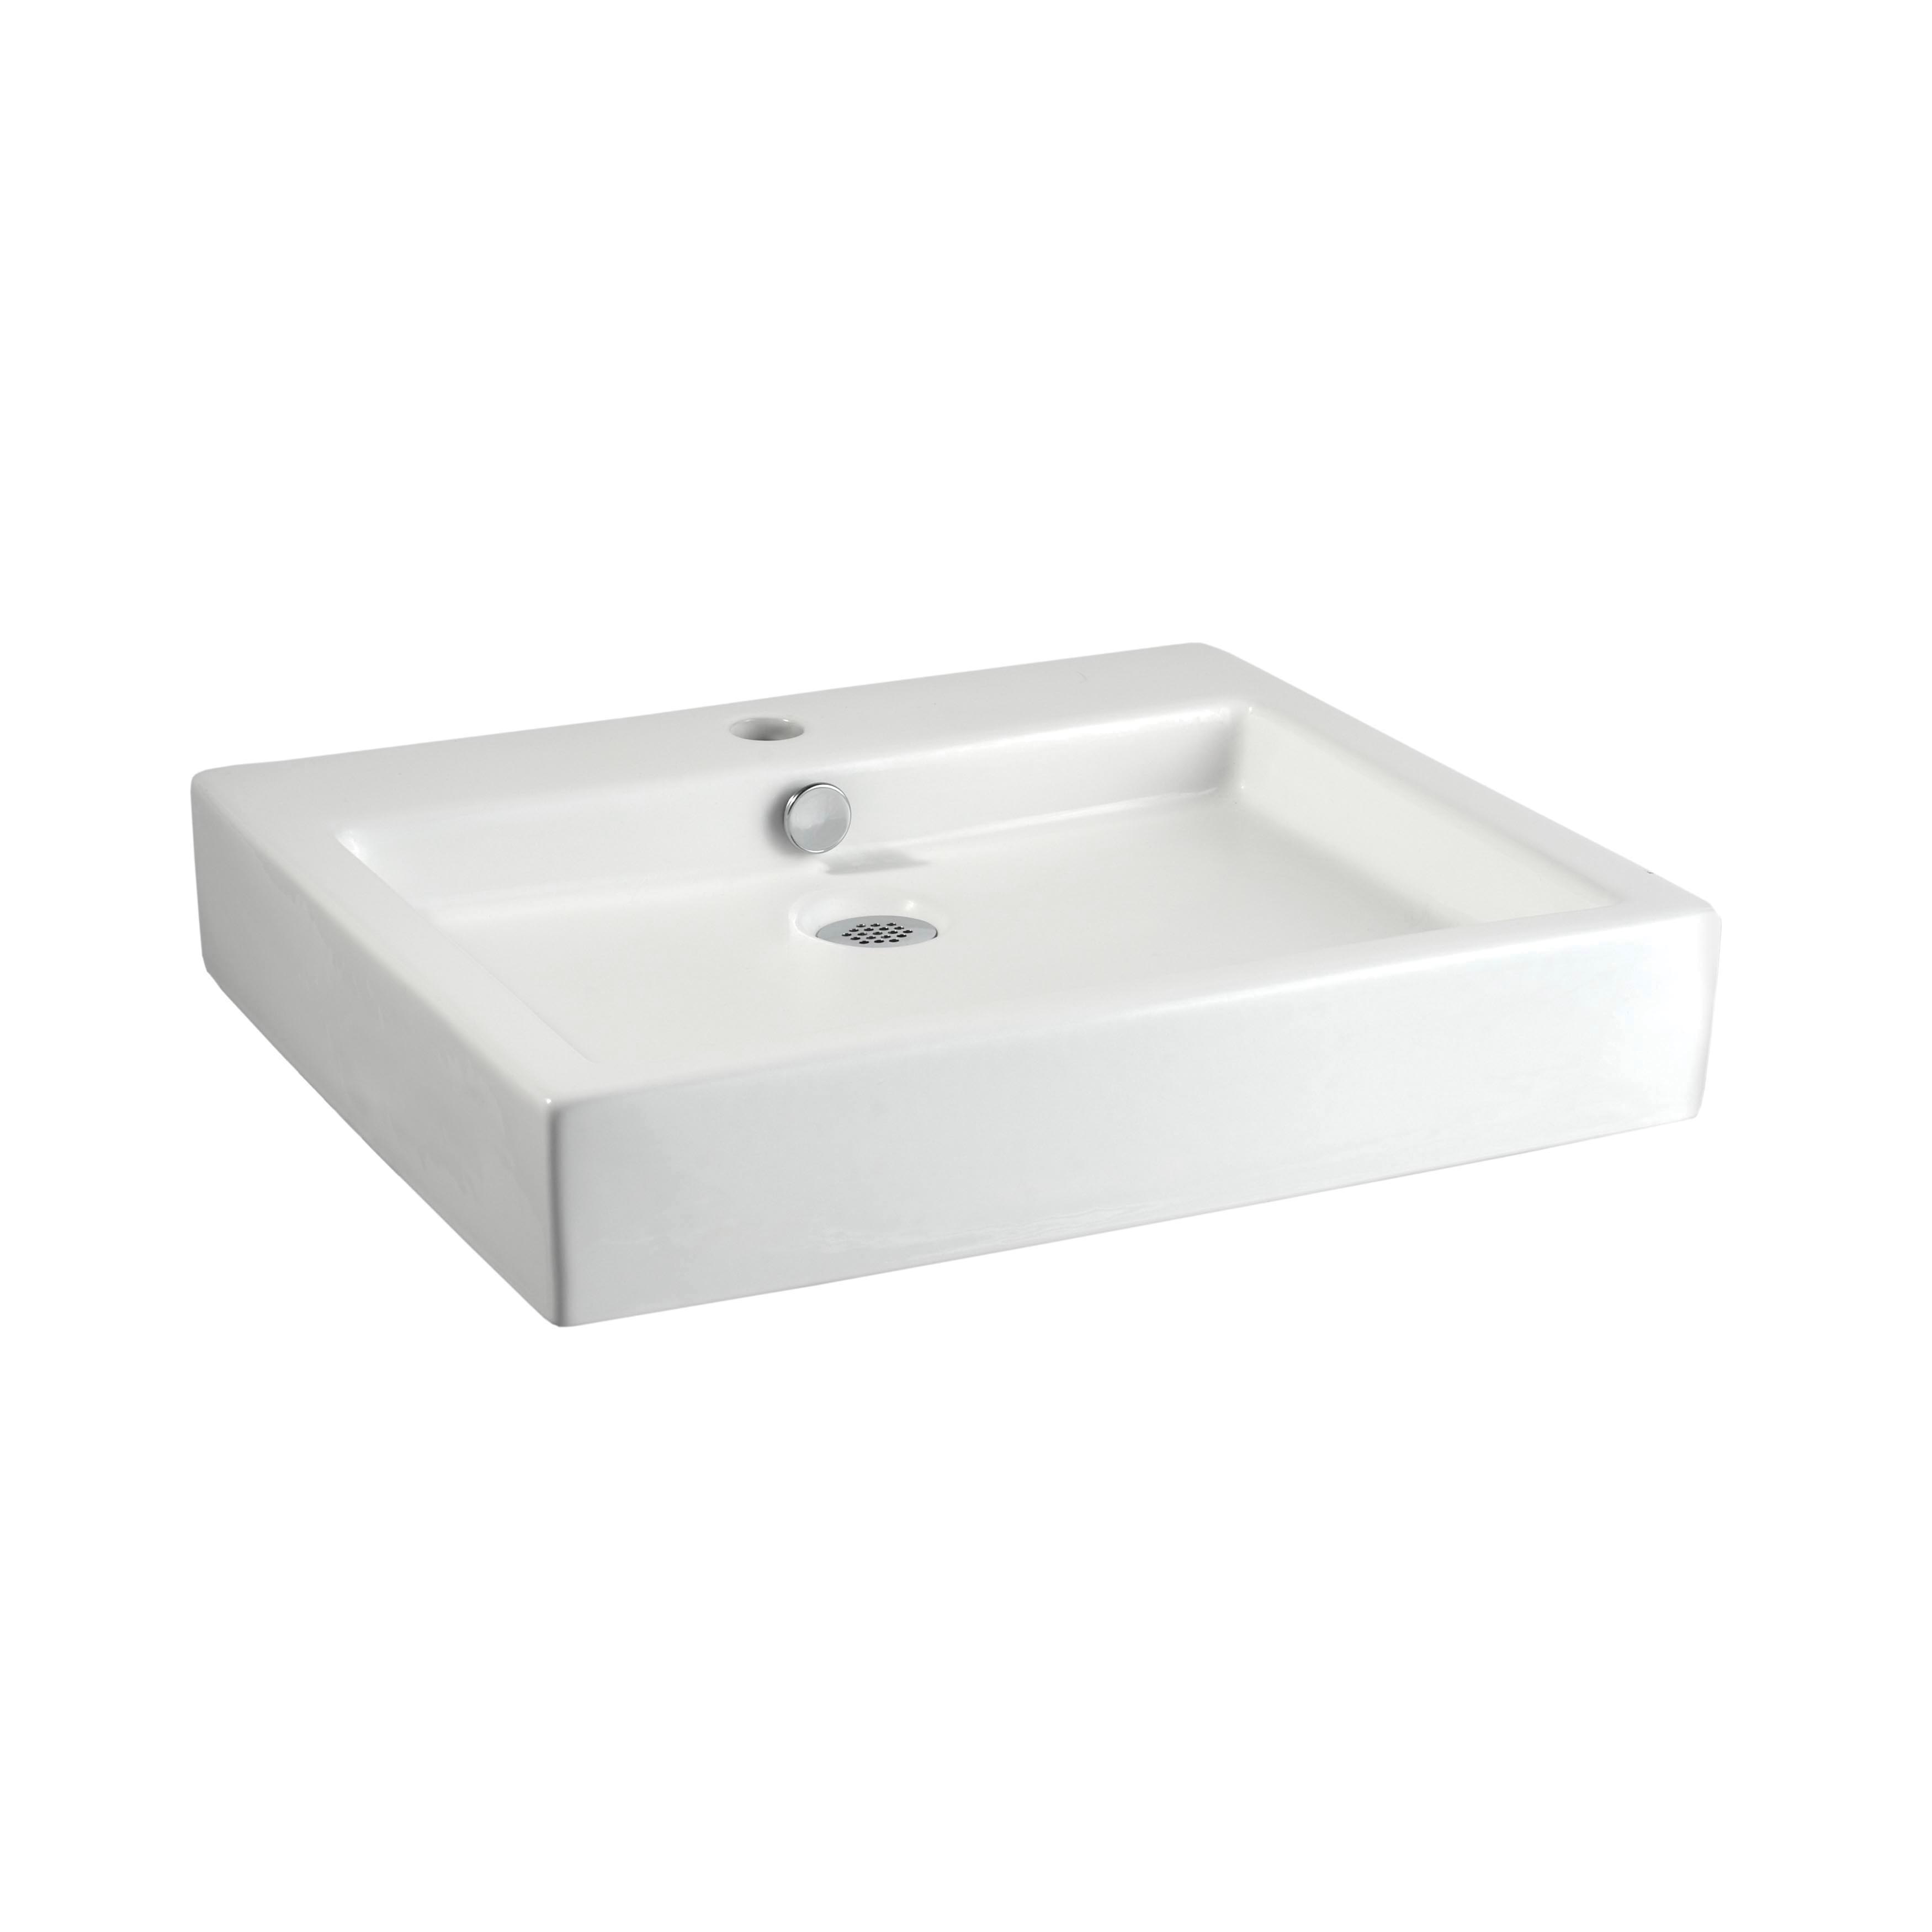 American Standard 0621.001.020 Studio™ Suite Lavatory Sink With Rear Overflow, Rectangular, 22 in W x 4-1/2 in D x 18-1/2 in H, Above Counter Mount, Vitreous China, White, Import